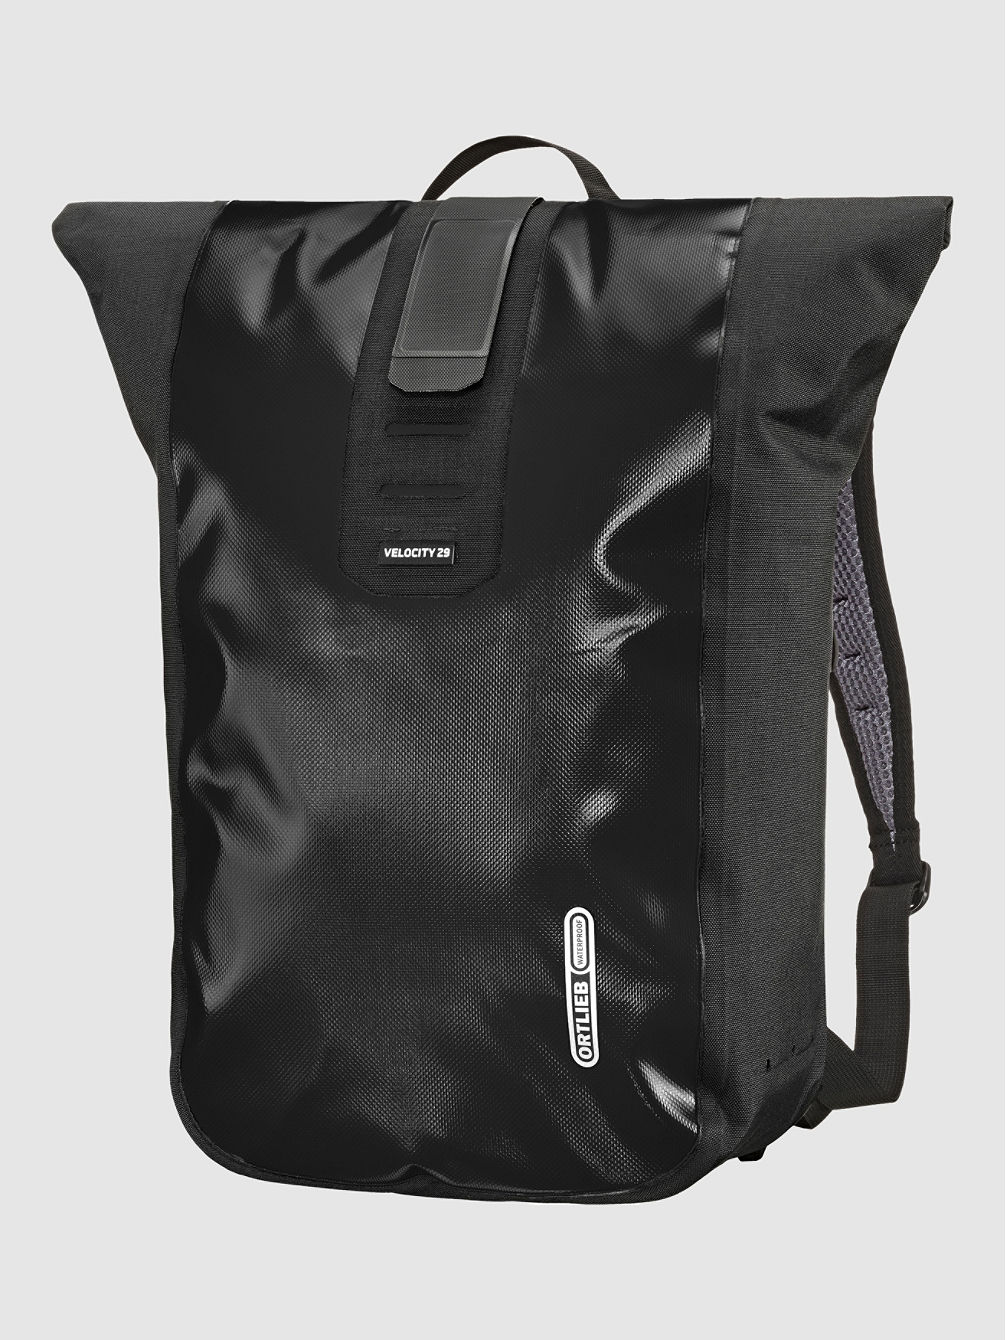 Velocity 29L Backpack